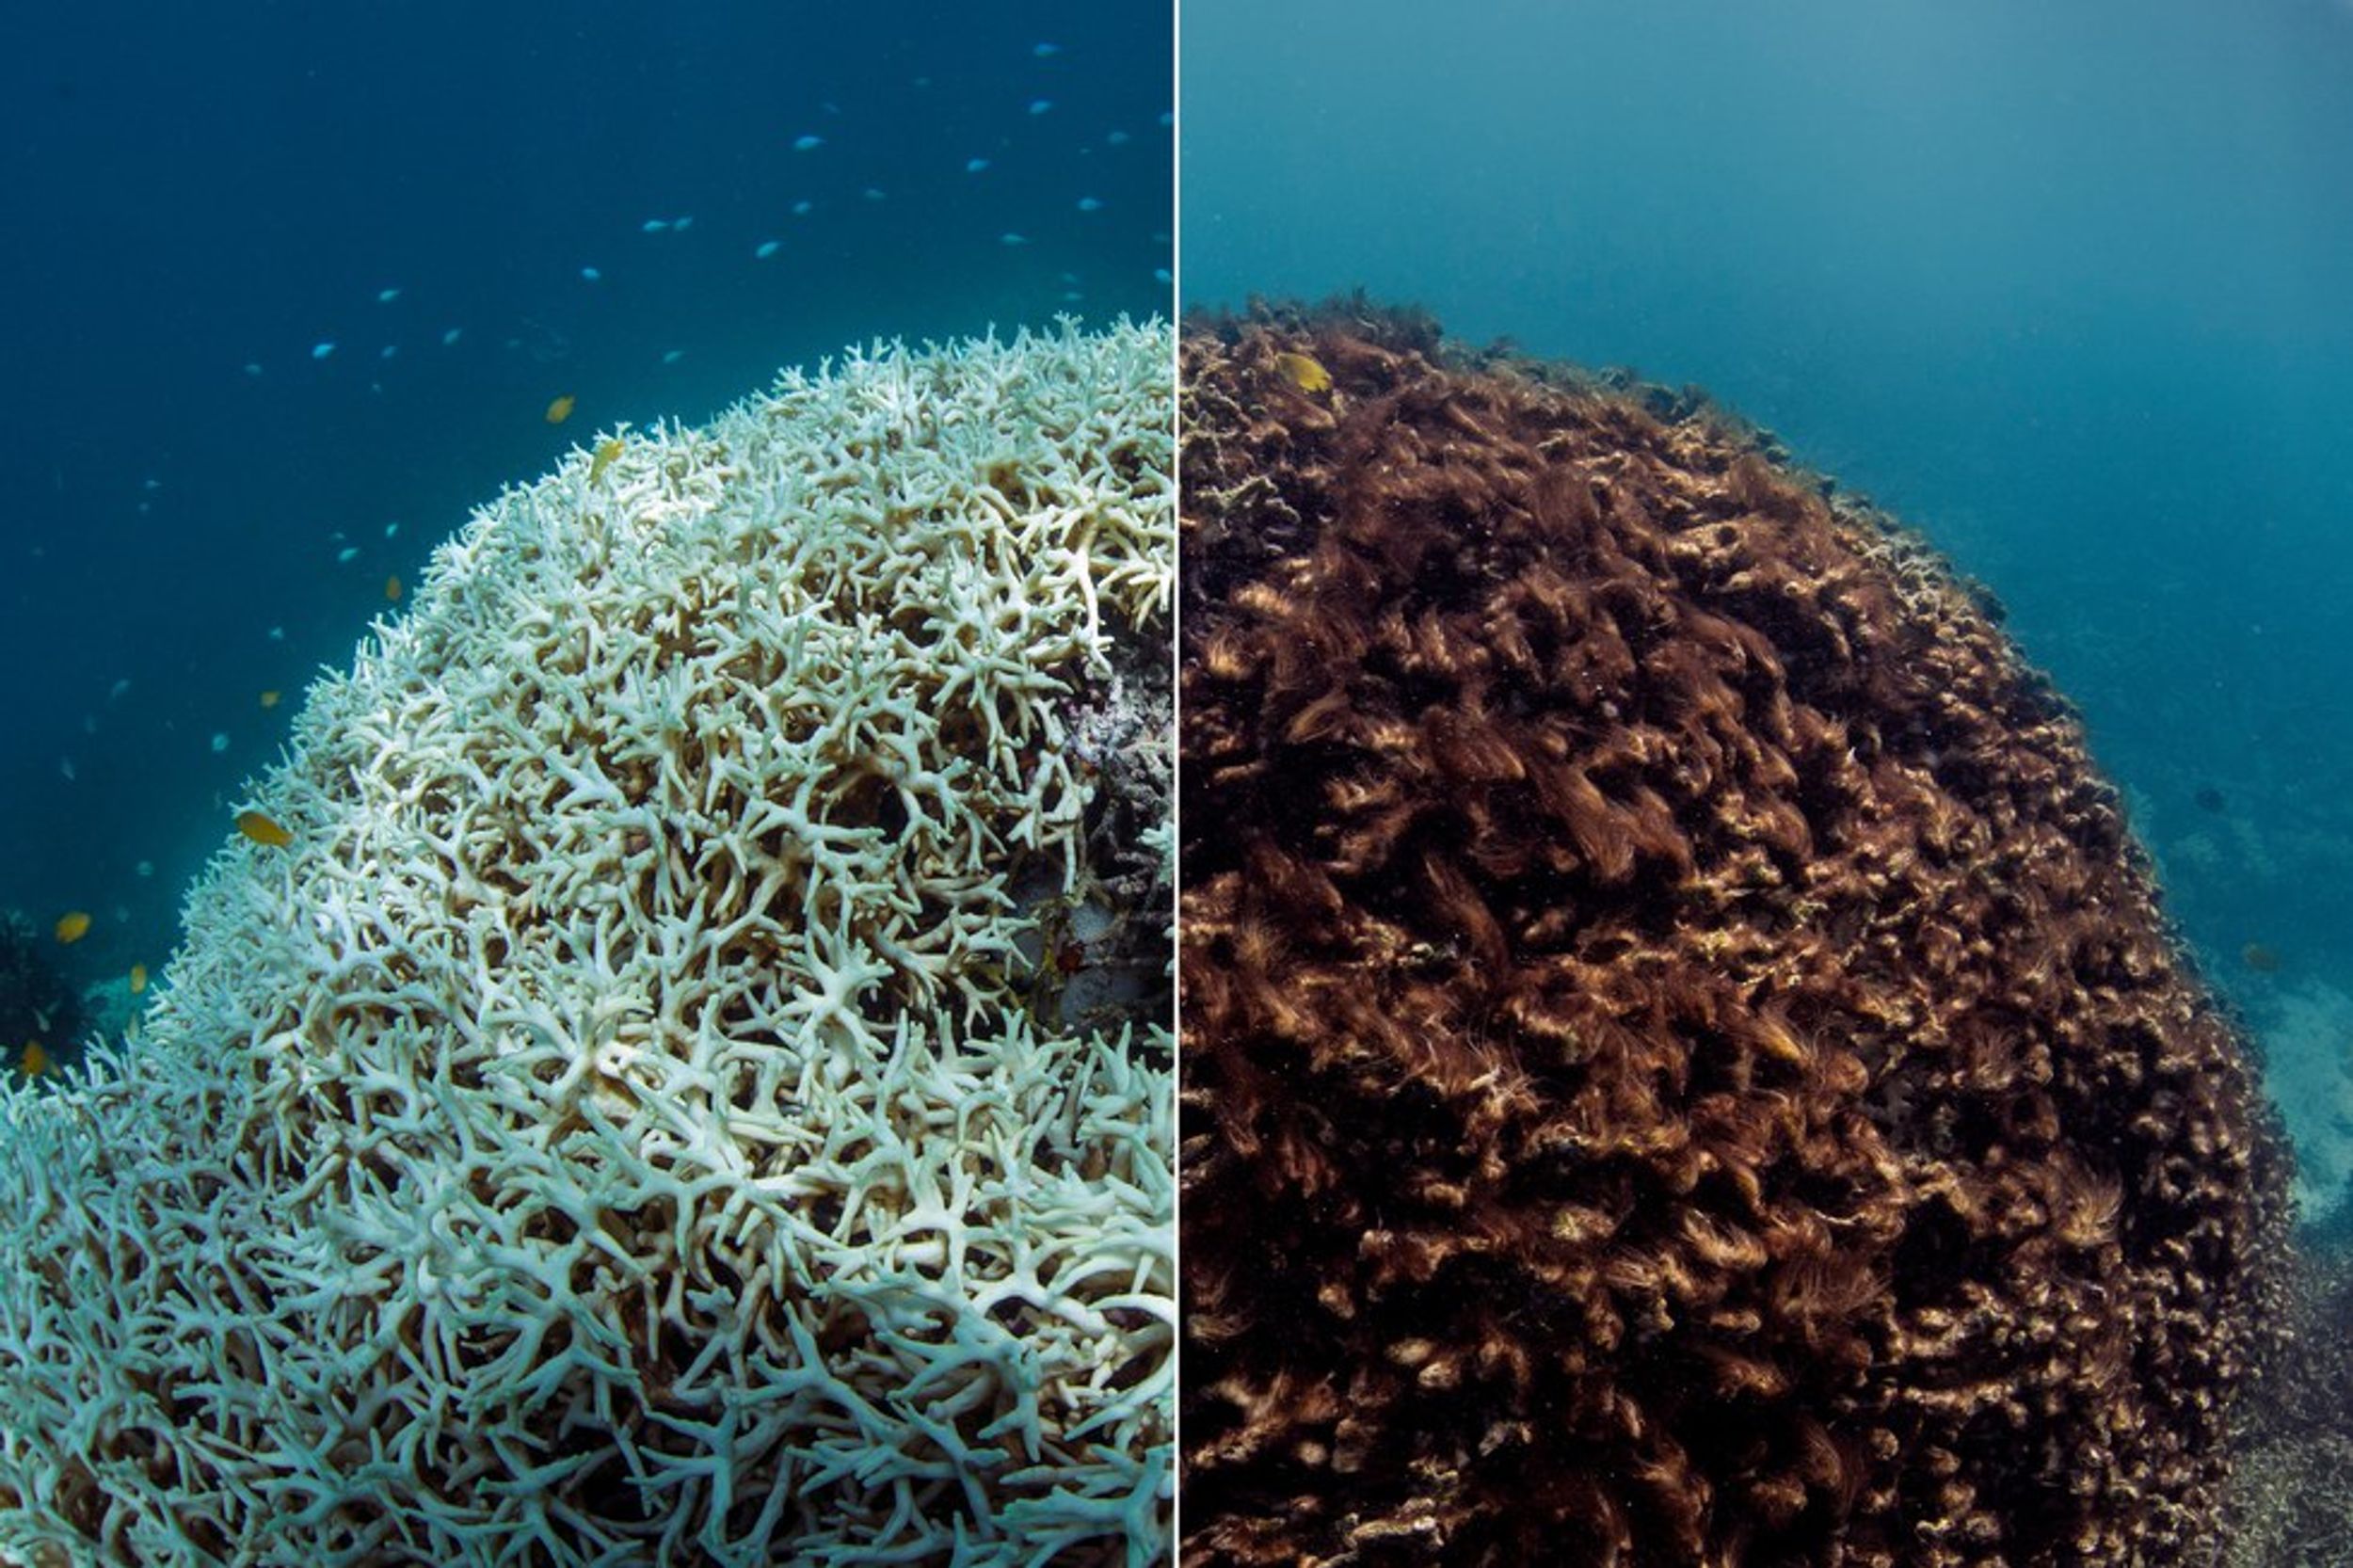 11 Ways to Save the Great Barrier Reef